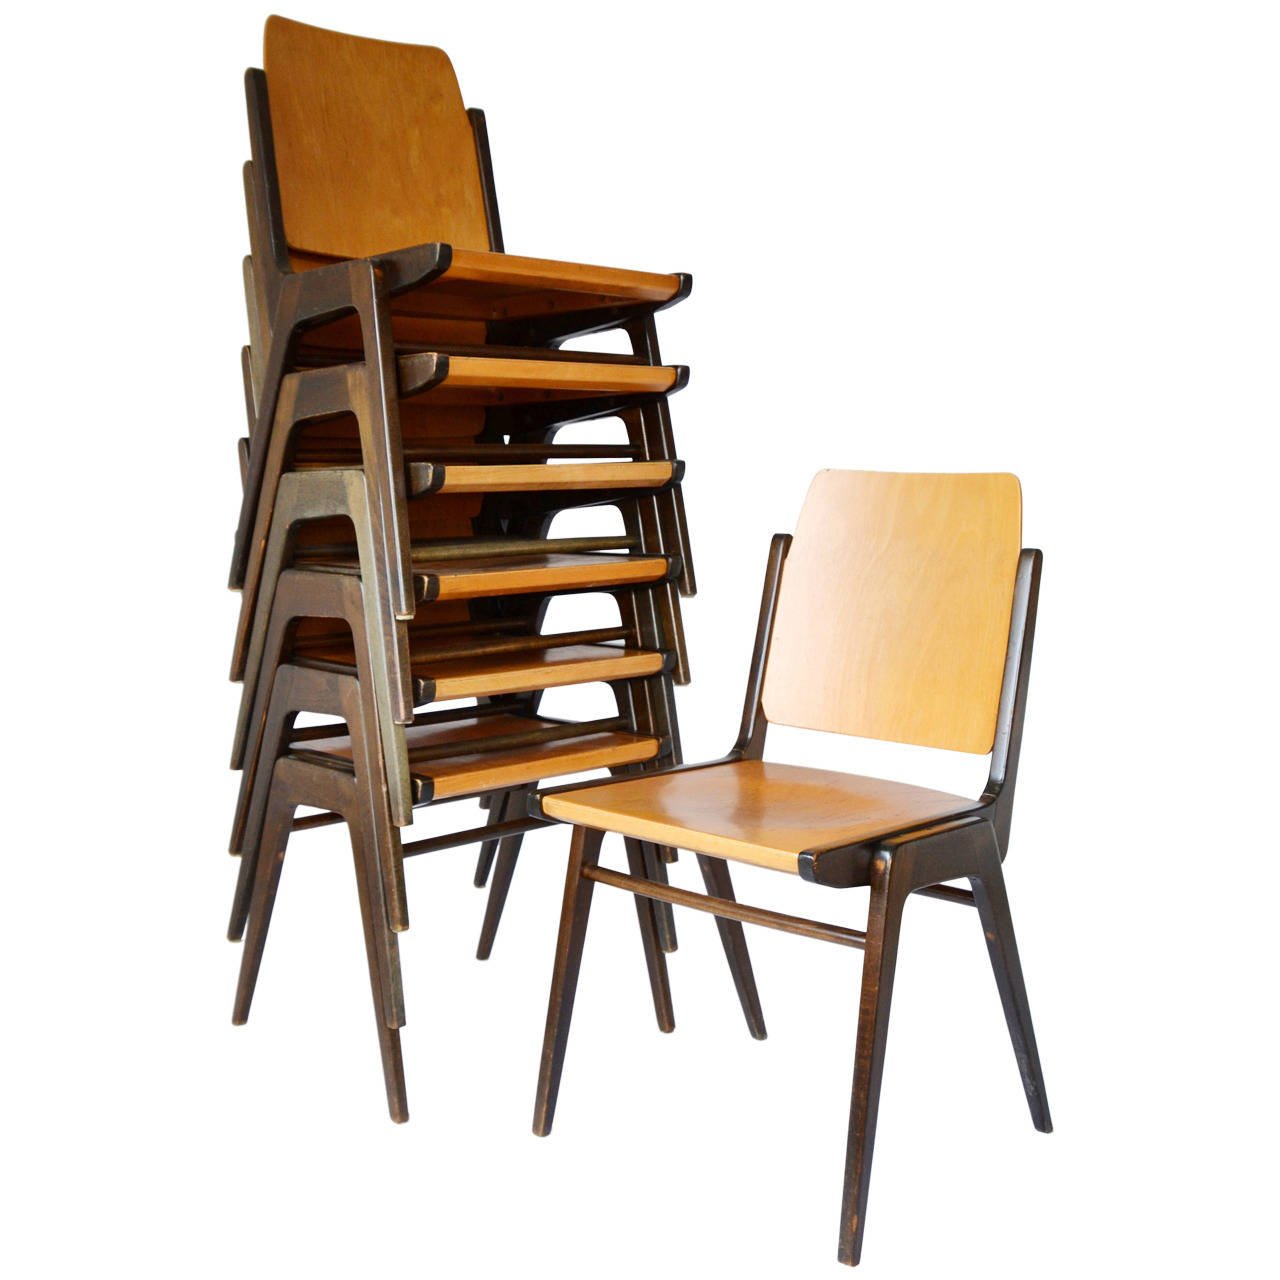 Stacking Chairs one of twelve bicolored stacking chairs designed by austrian architect  franz schuster GQXHFMK